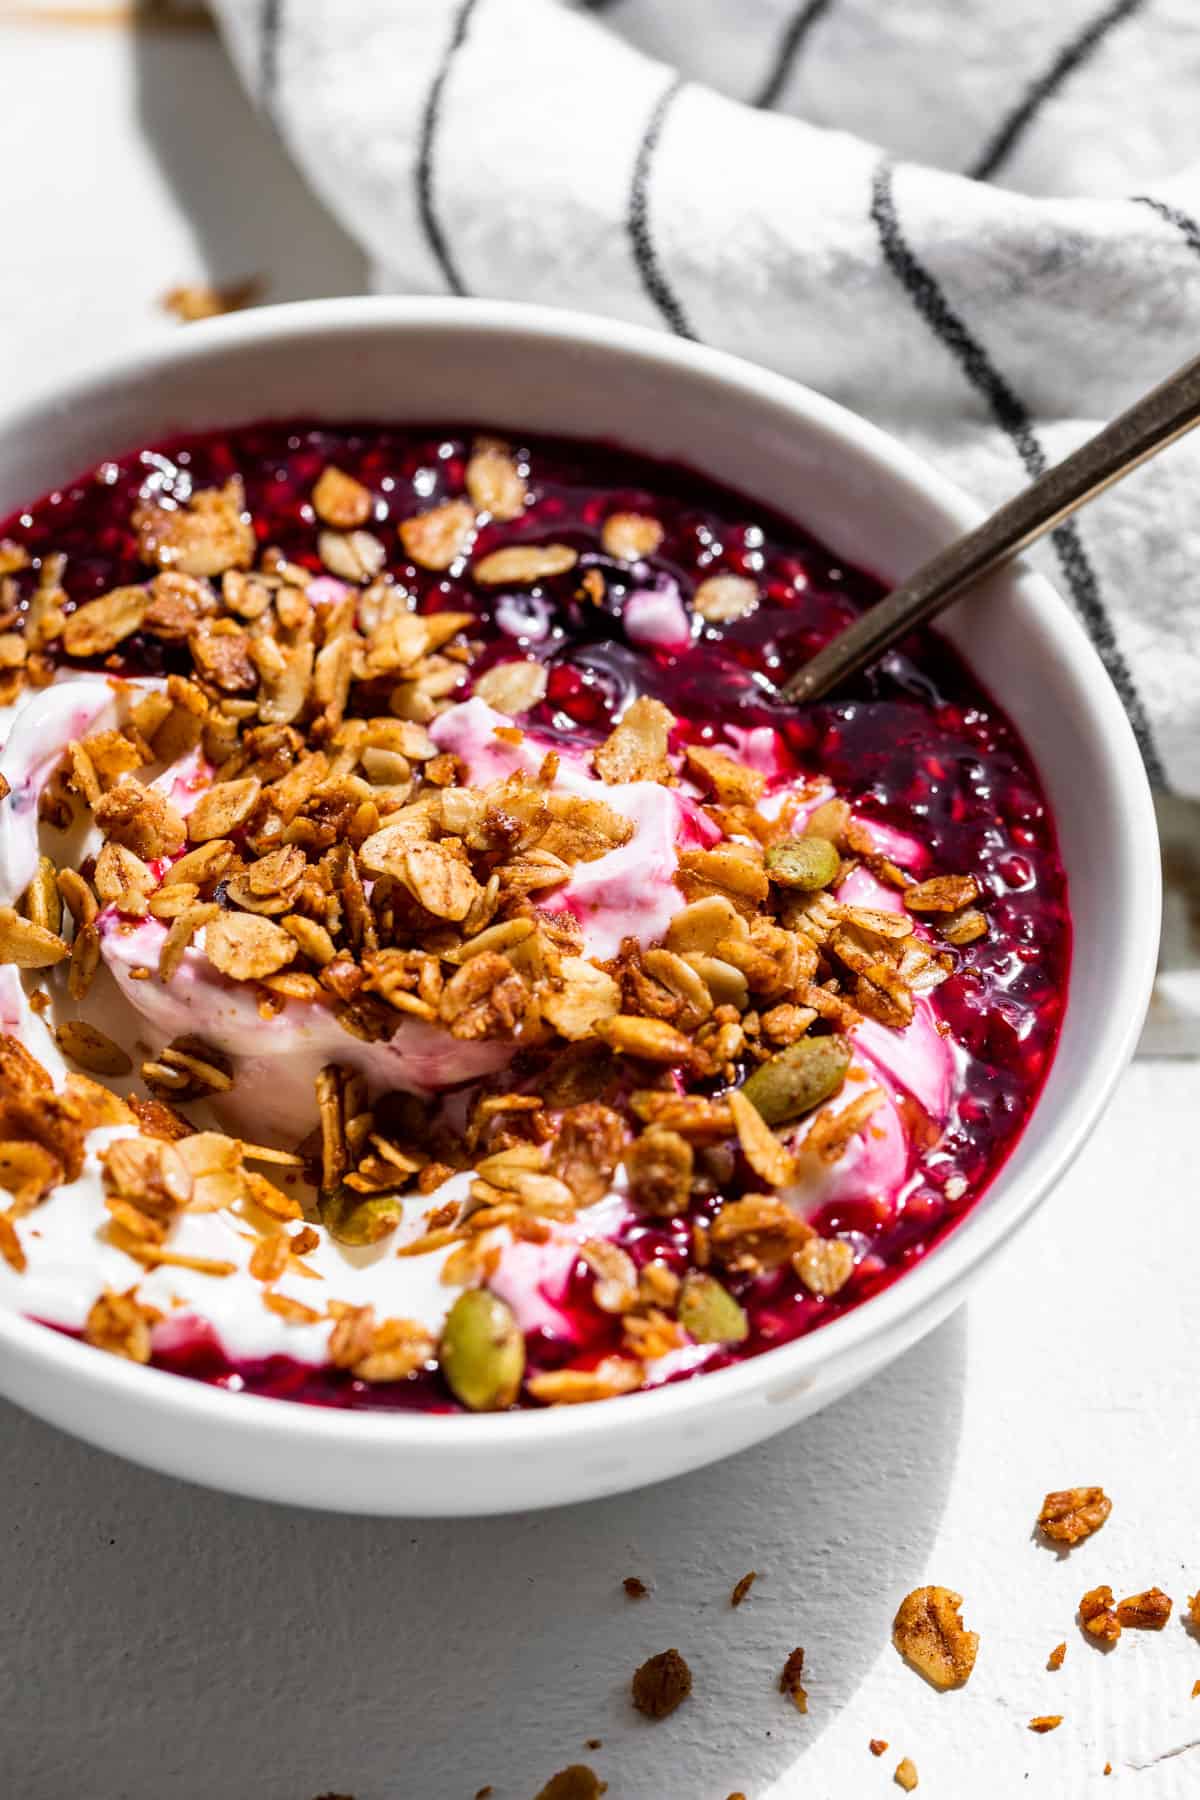 Yogurt with Berry Sauce and Homemade Granola in a white bowl.